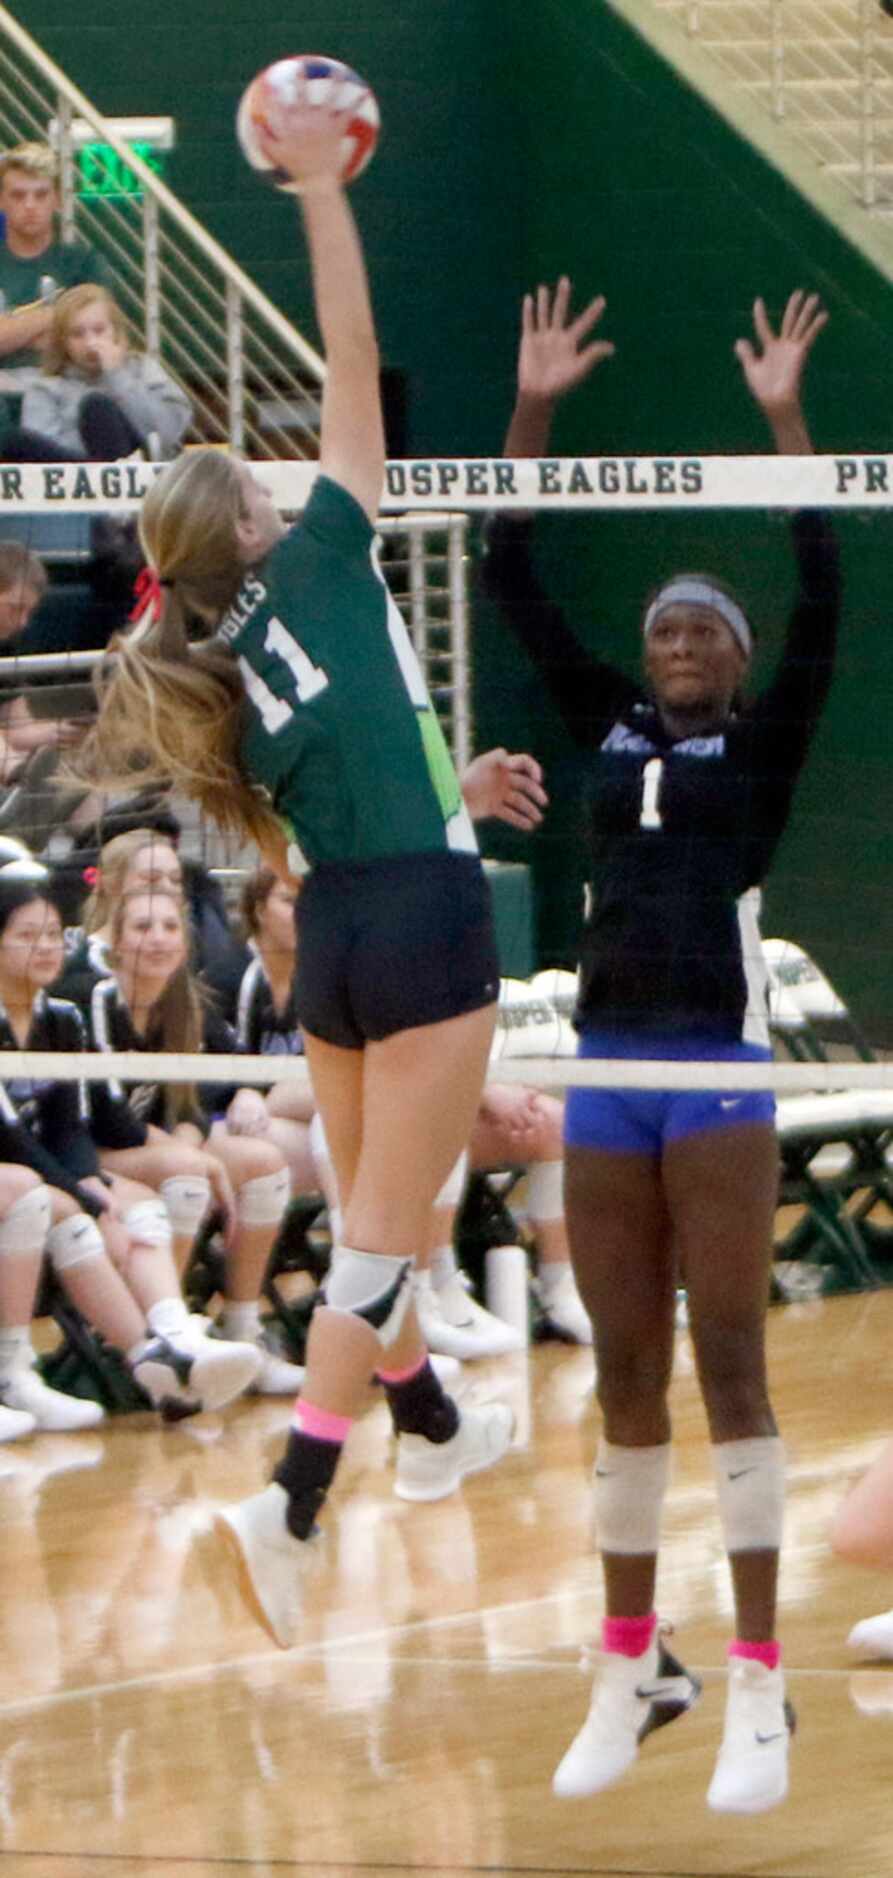 Prosper's Shaylee Shore (11) skies to spike against the defense of Iman Ndiaye (1) during...